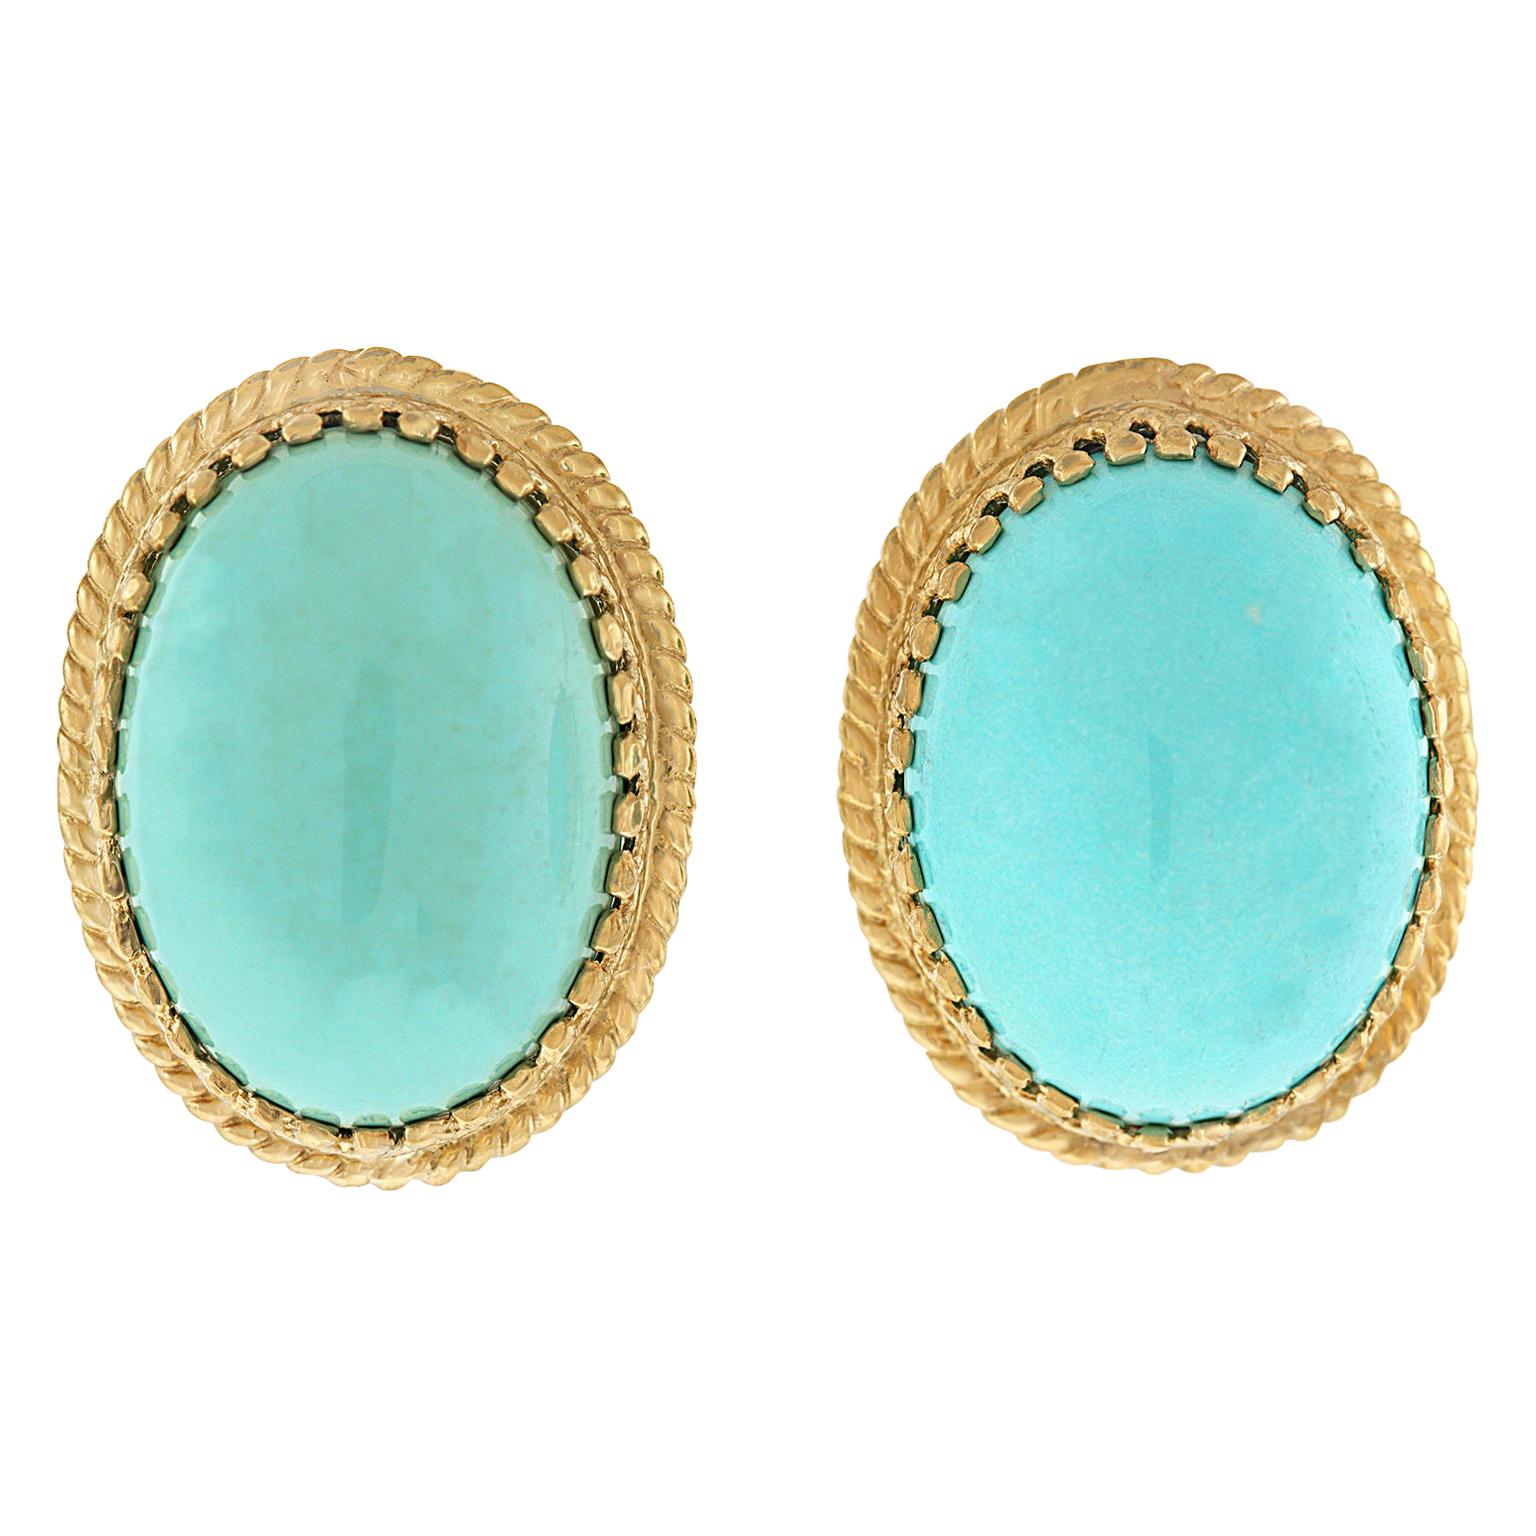 Cellino Persian Turquoise-Set Gold Earrings